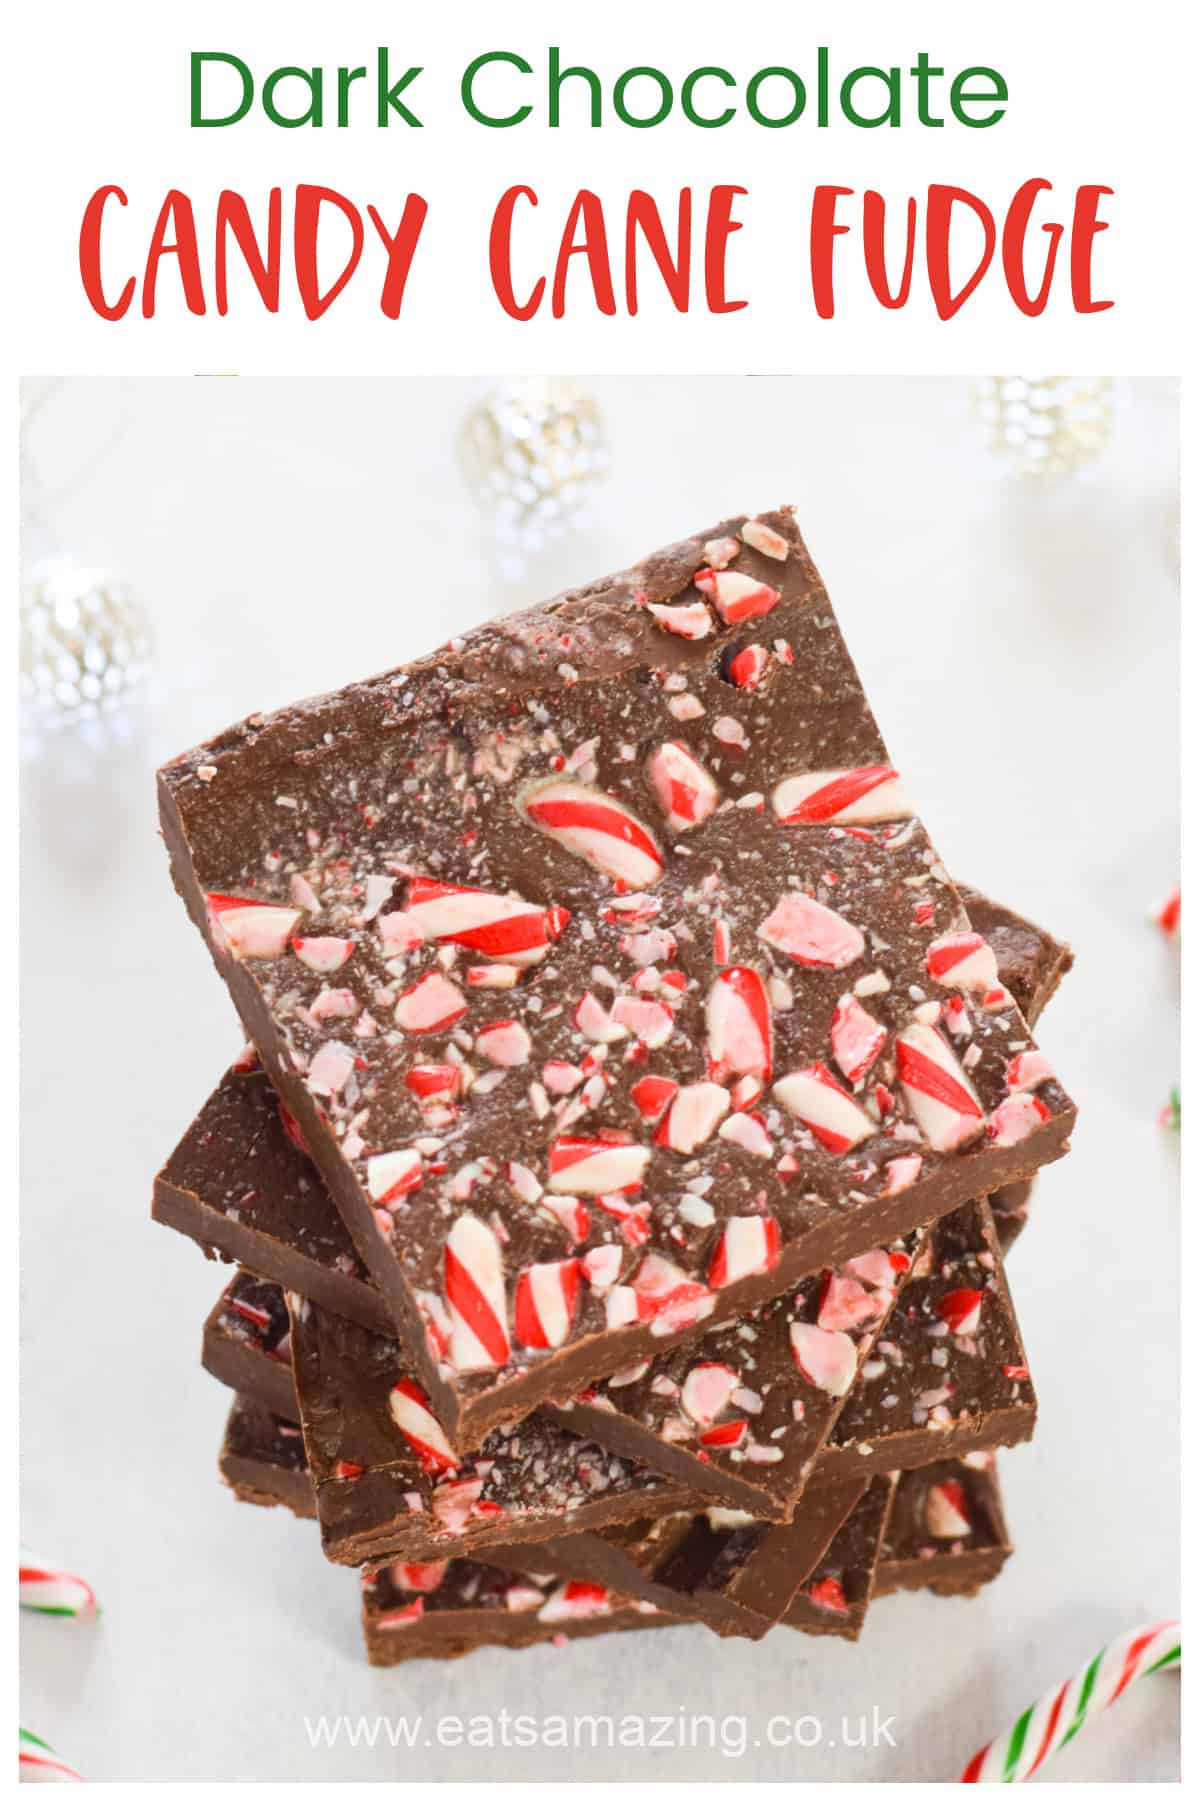 This quick and easy dark chocolate candy cane fudge recipe is perfect for homemade Christmas gifts